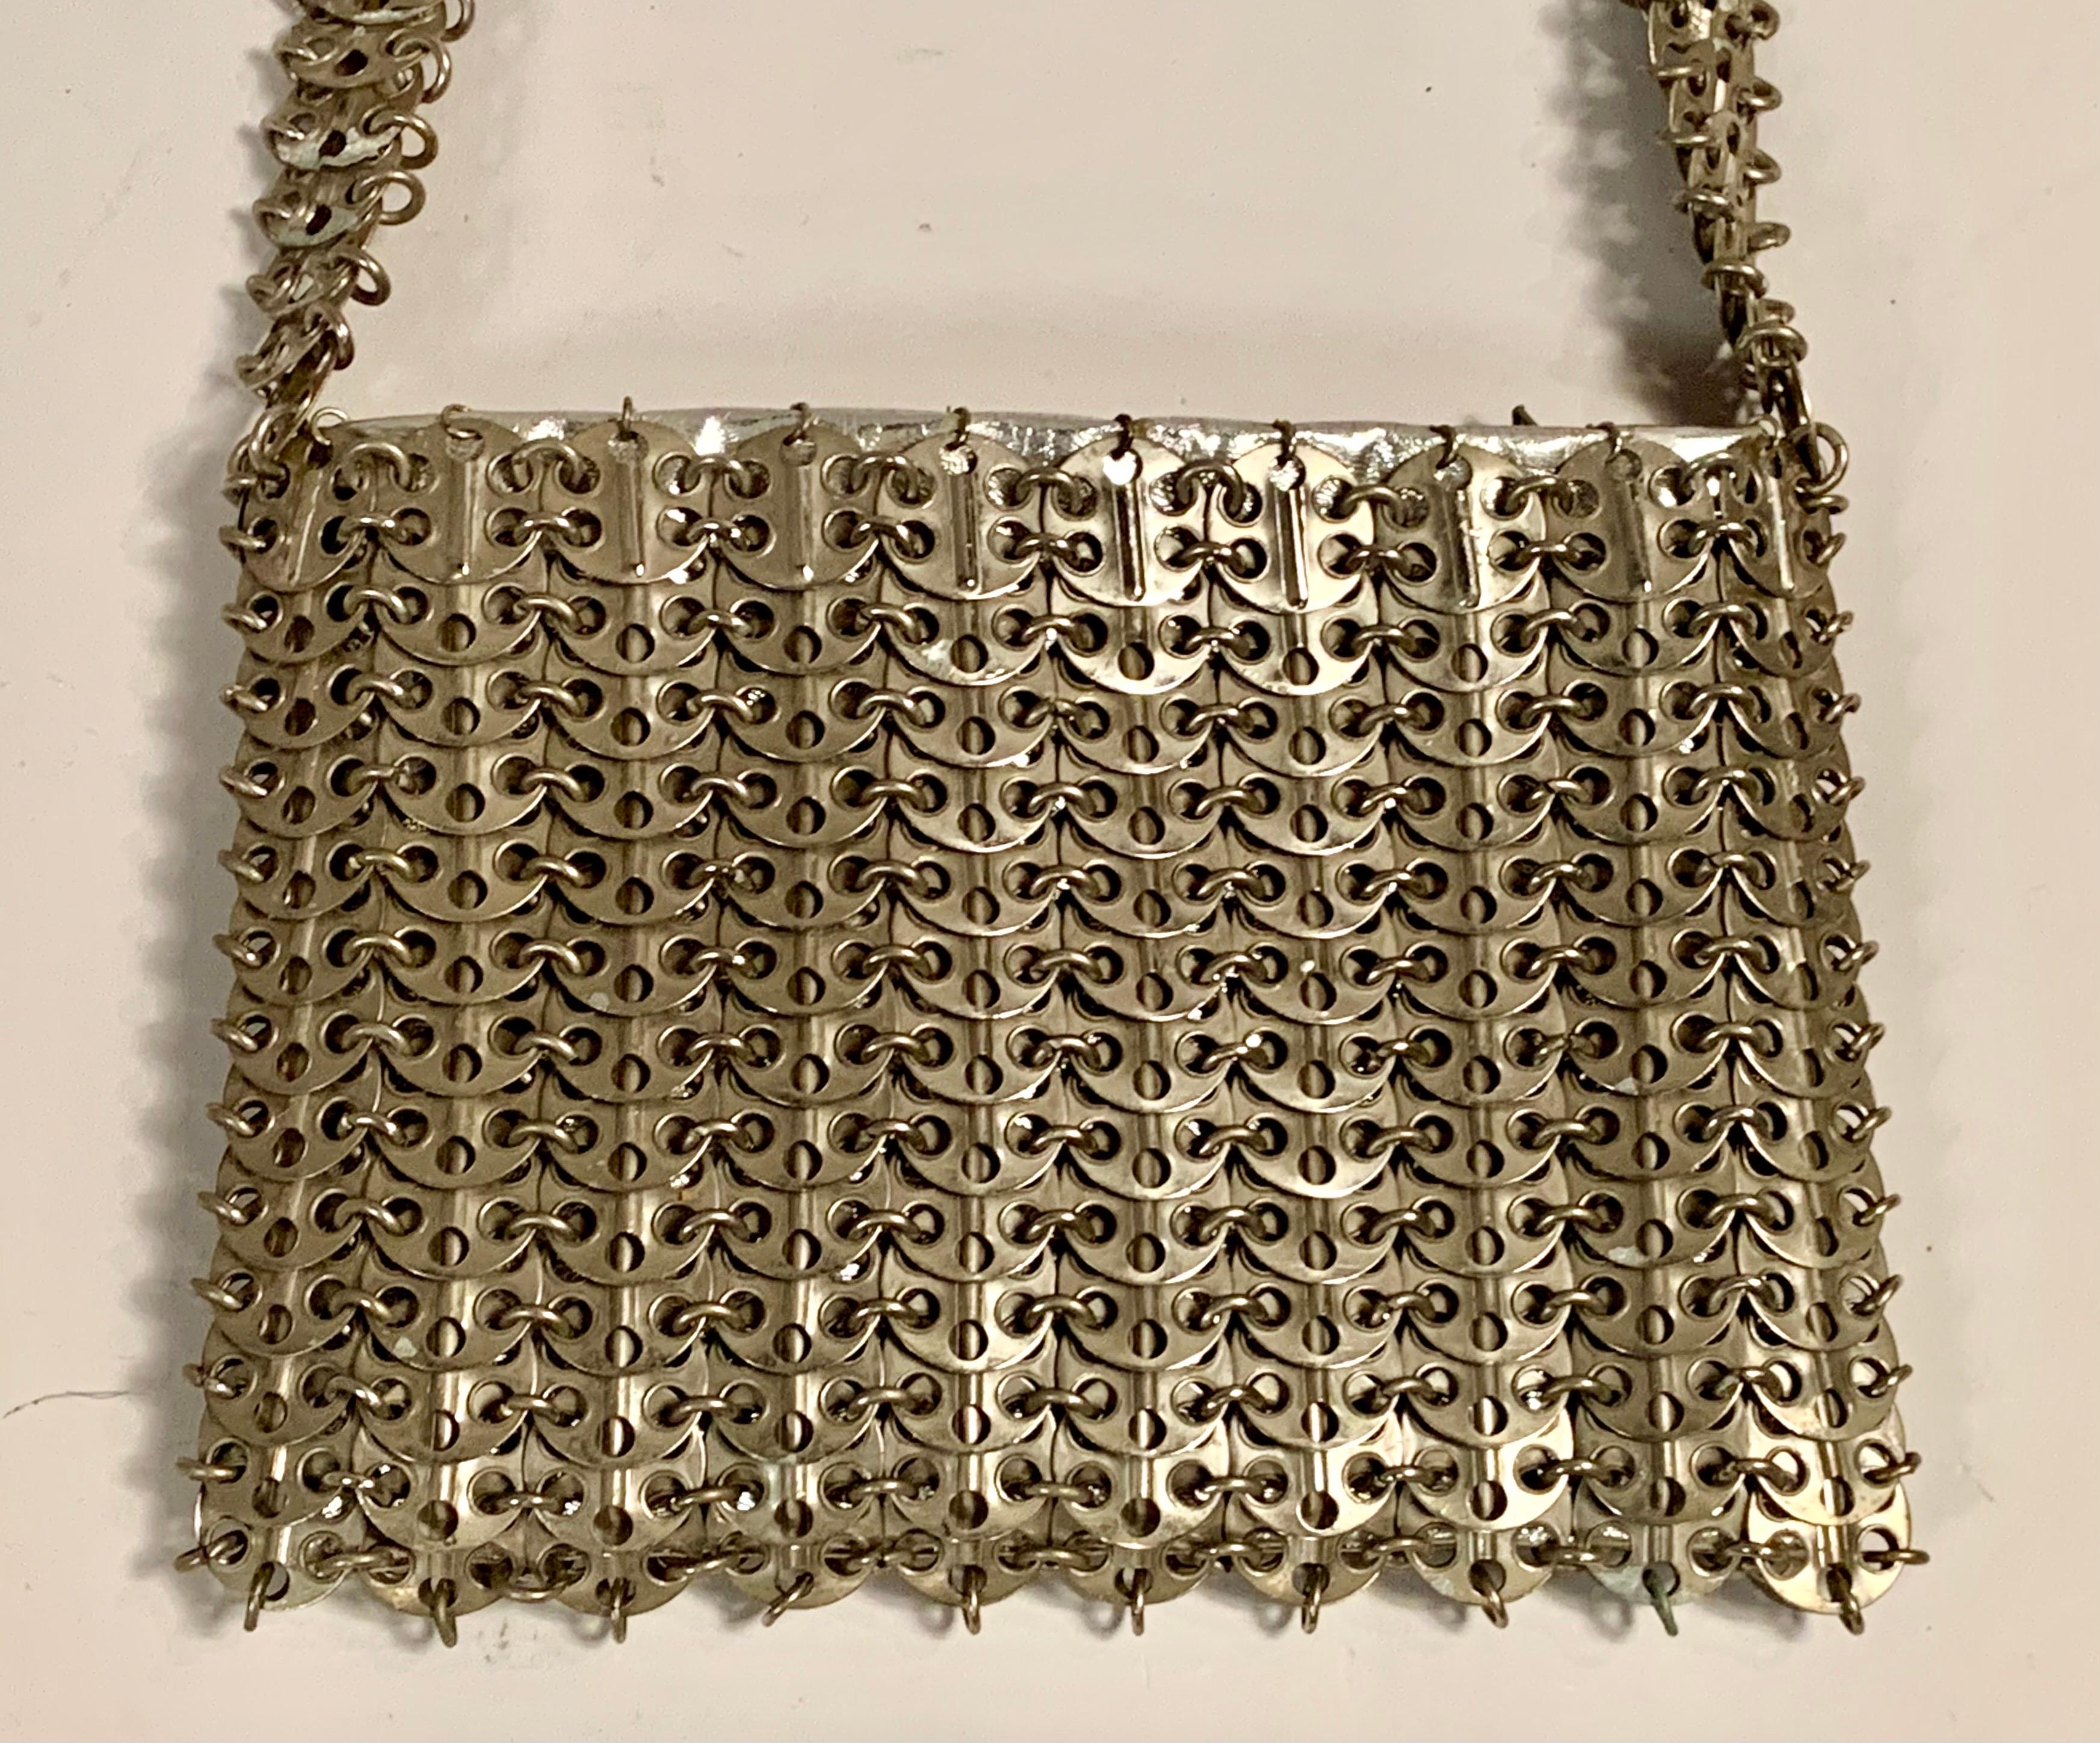 French designer Paco Rabanne is best known for his revolutionary 1968 dresses made from metal discs and rings. This rare handbag soon followed, made from the same materials. The bag has a shoulder strap, an interior silver leather pouch which has a